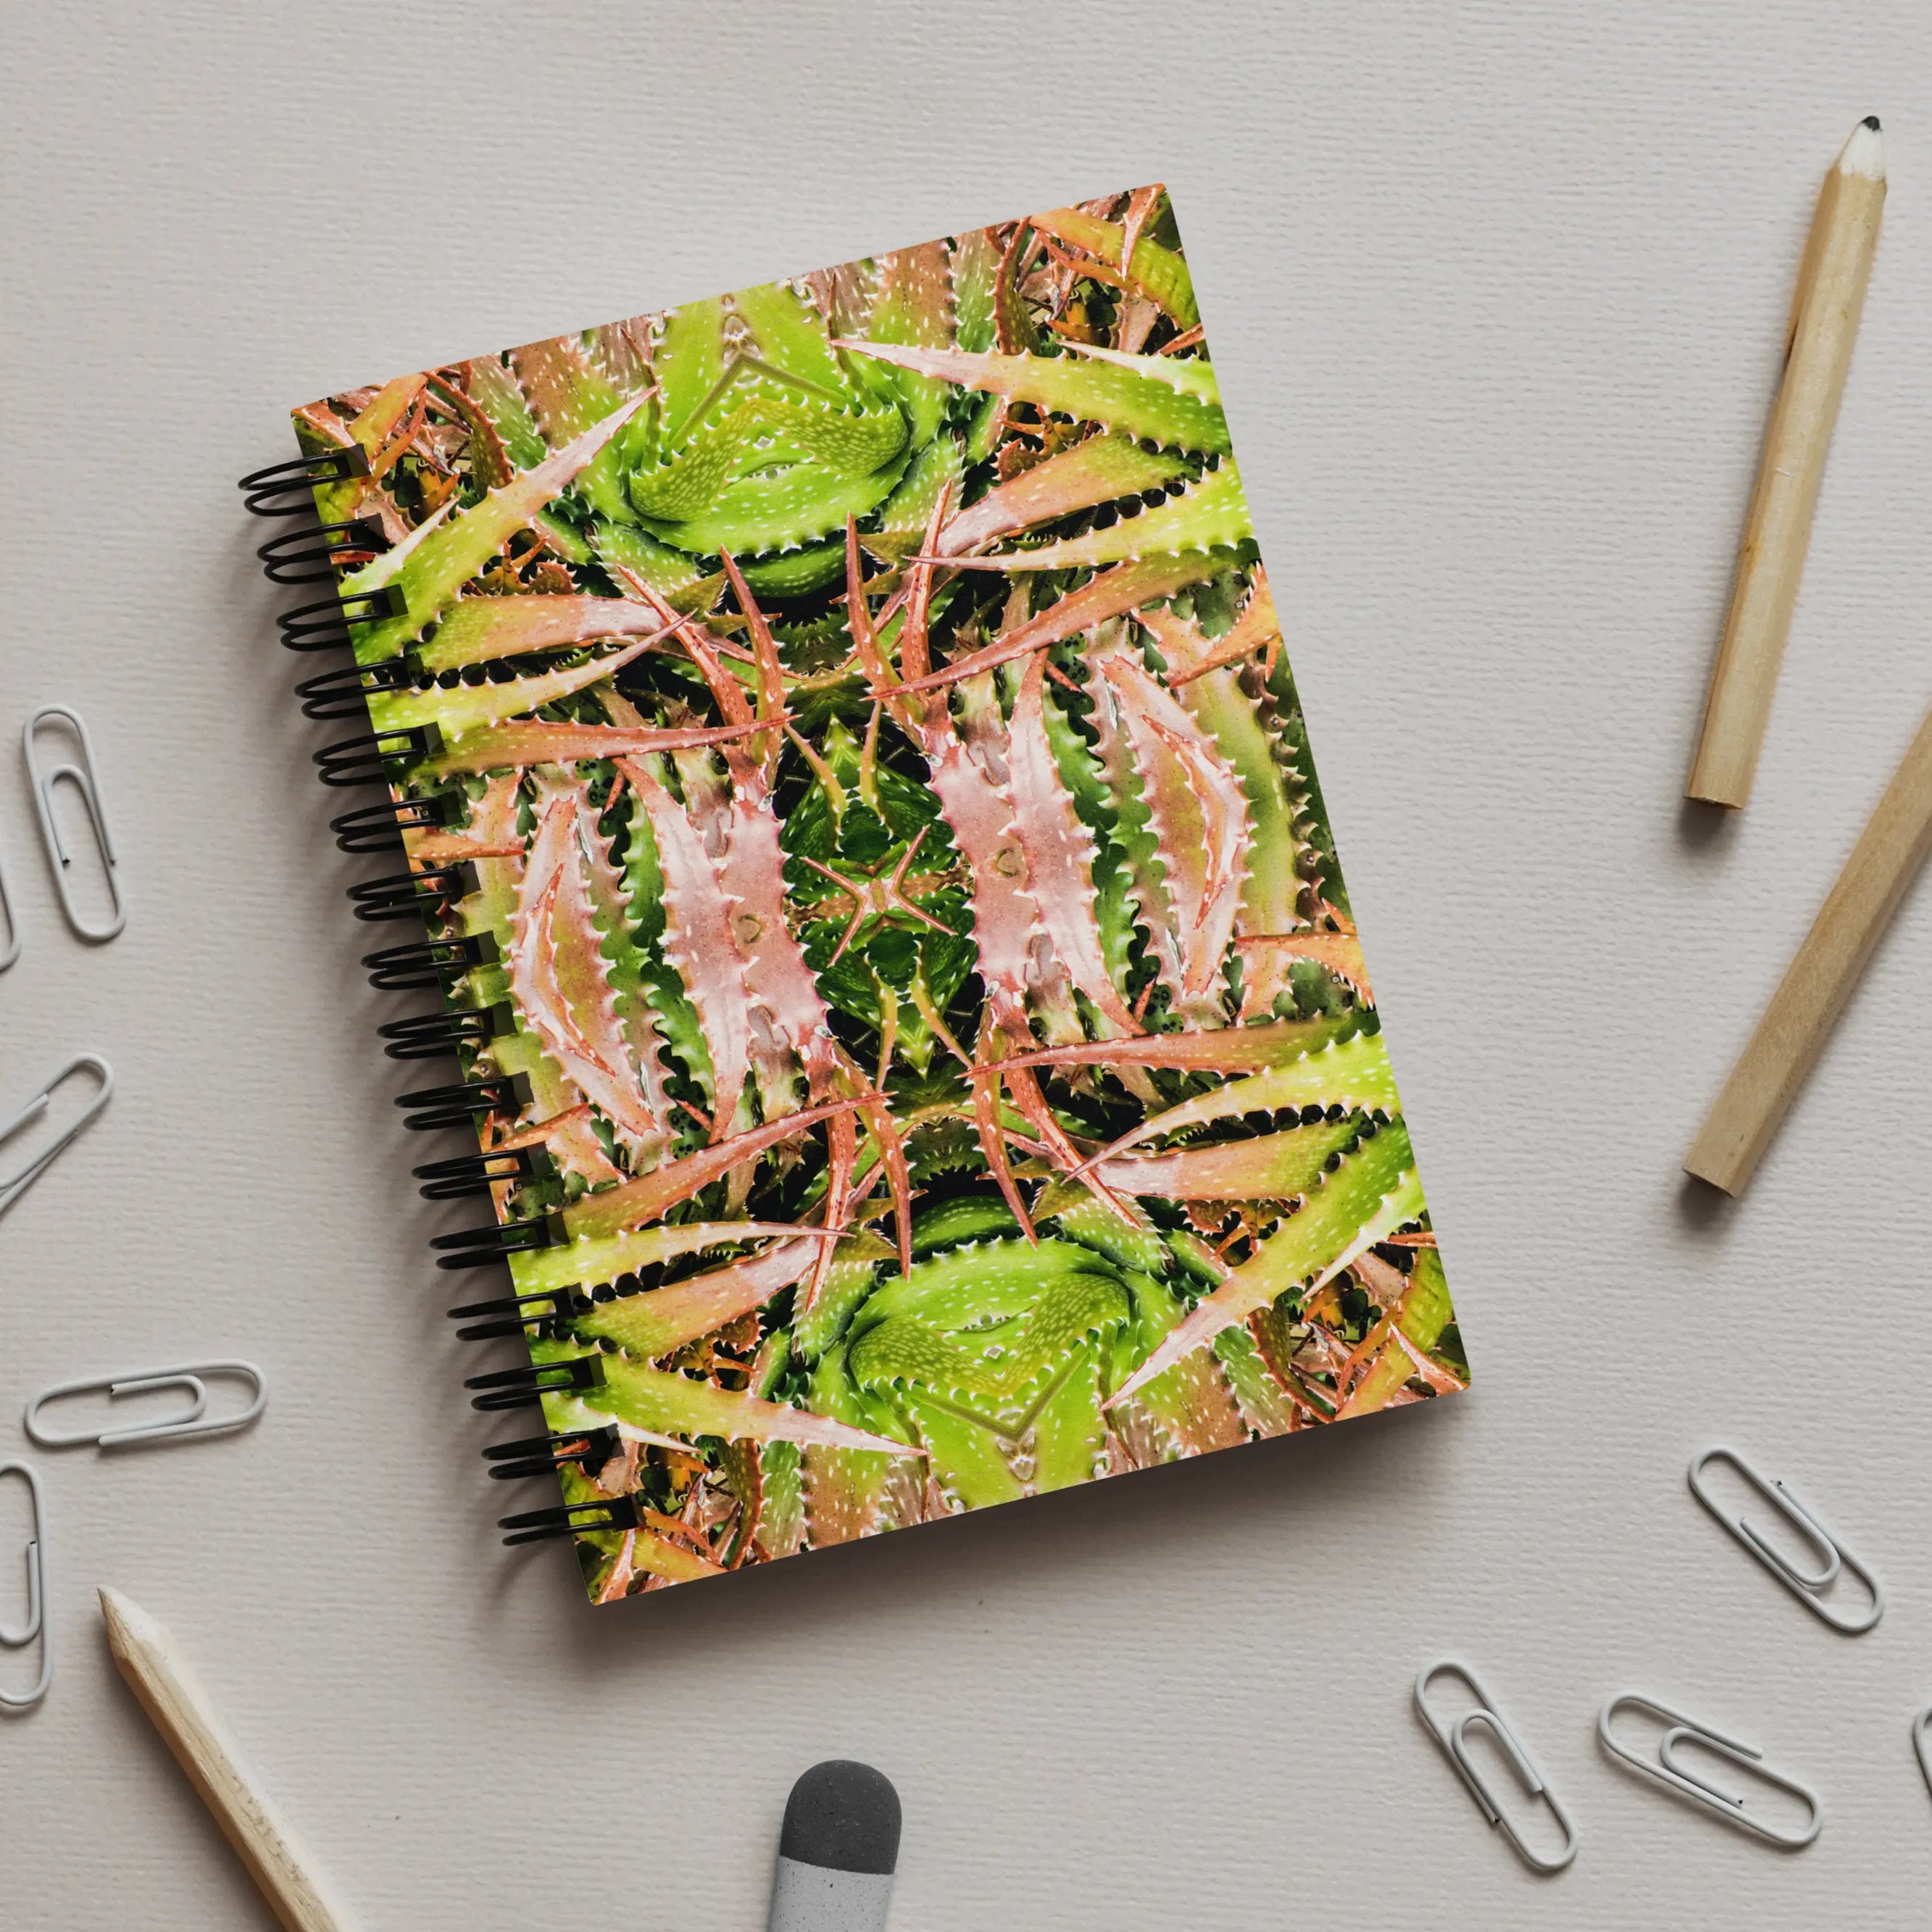 Centre Stage - Trippy Cactus Succulent Art Notebook - Notebooks & Notepads - Aesthetic Art